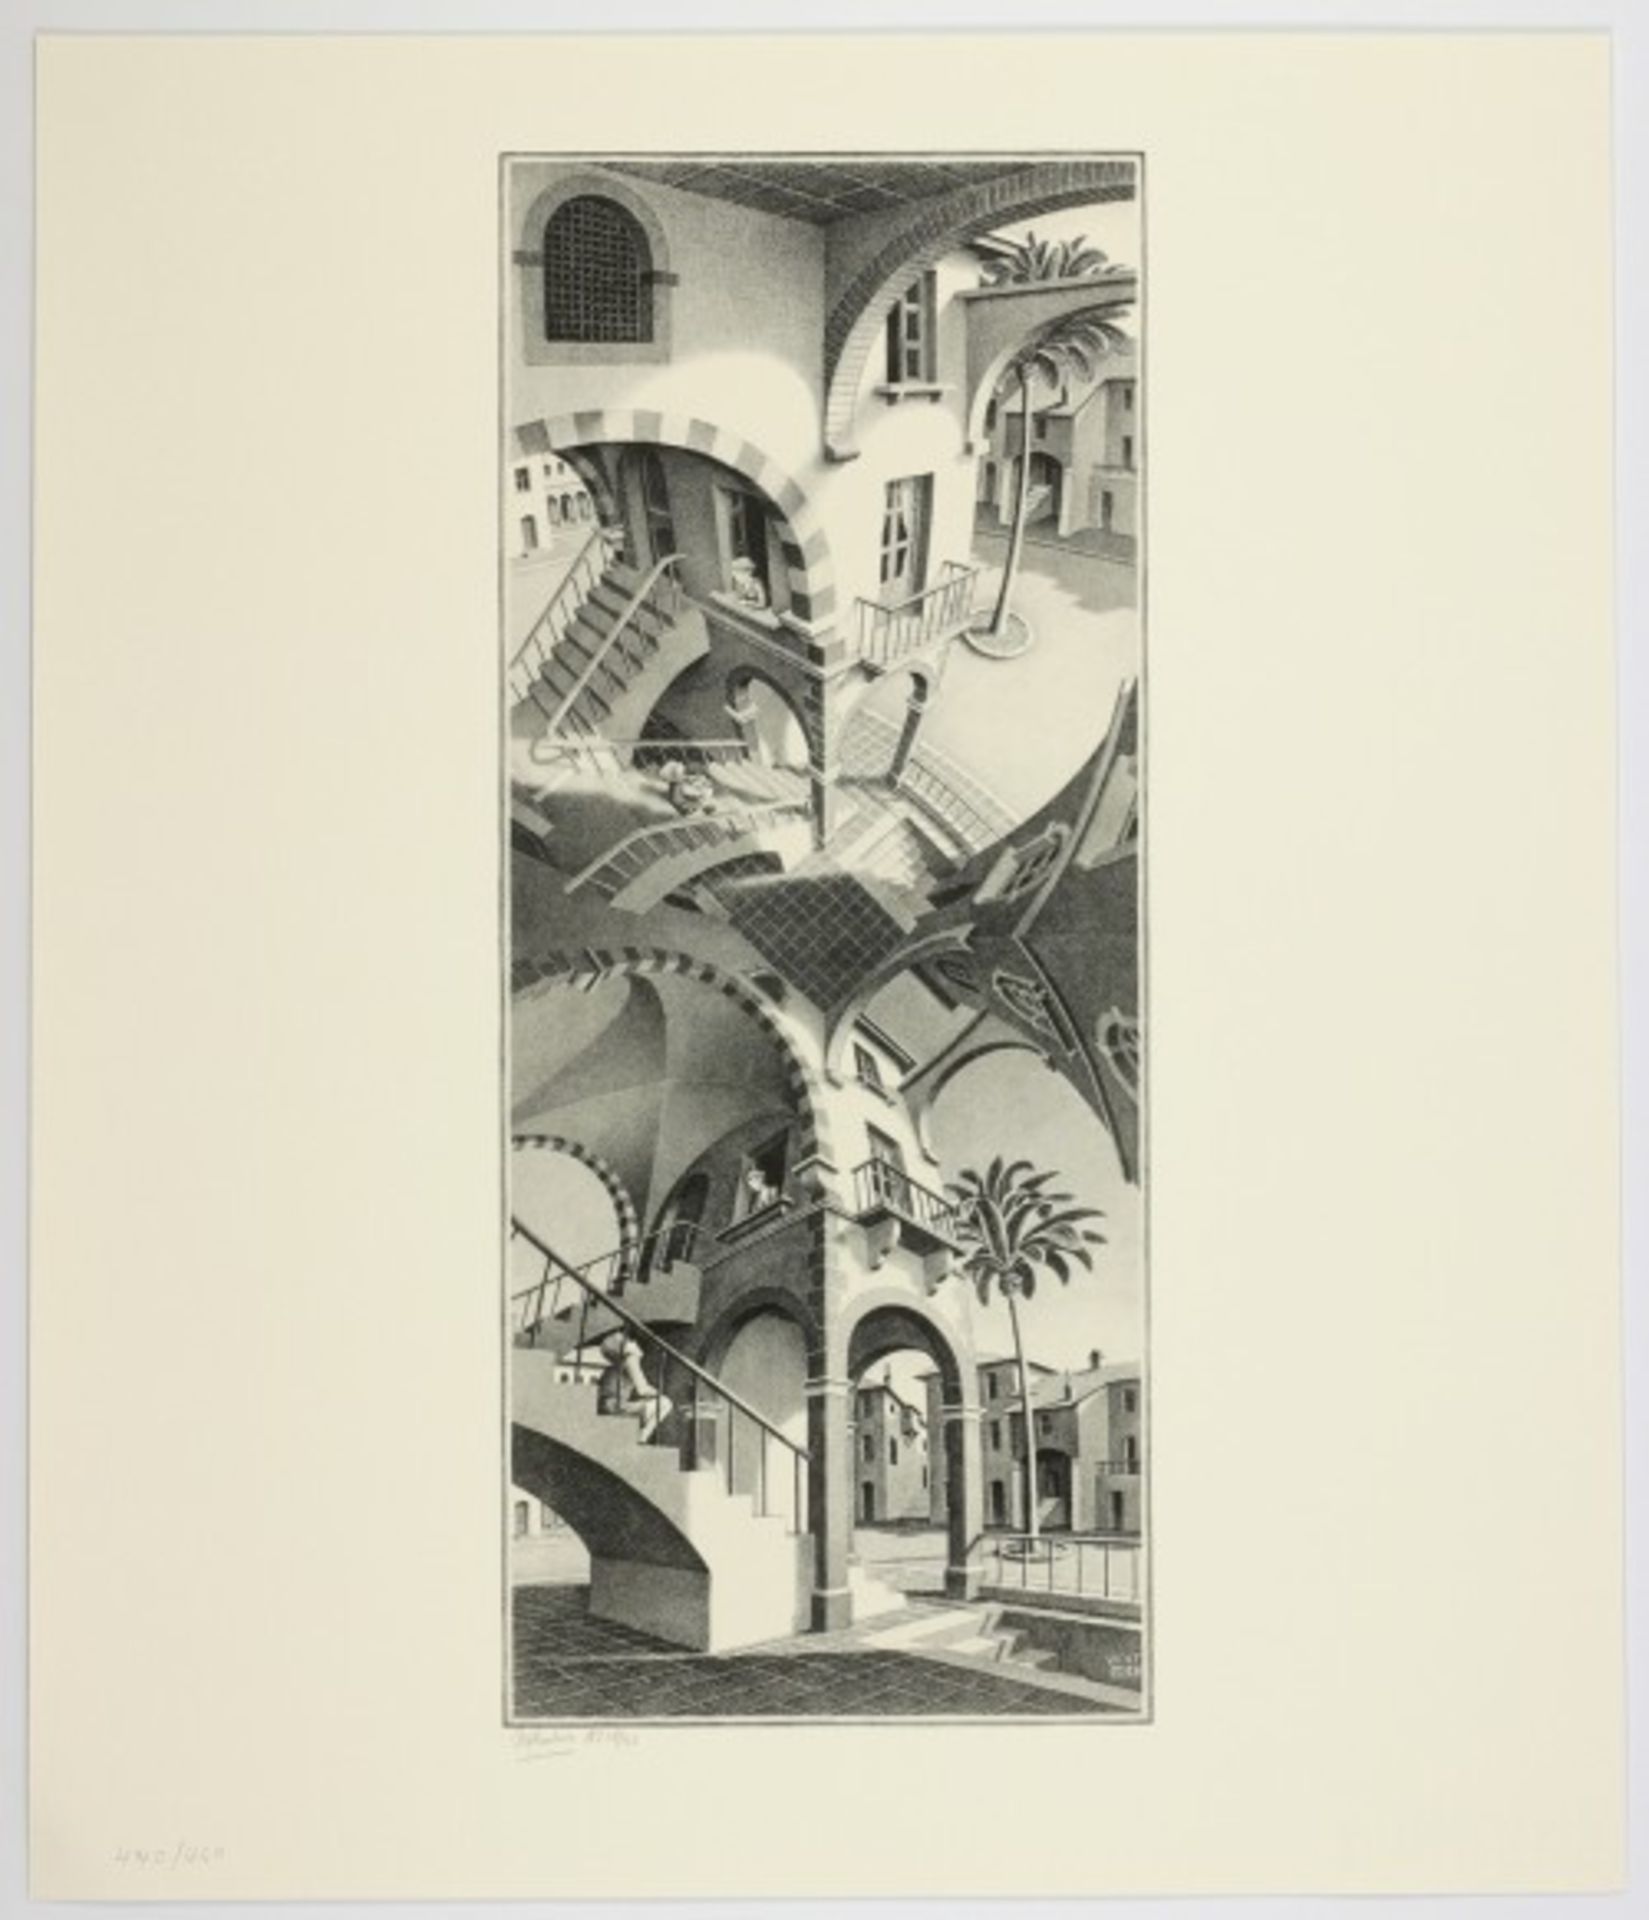 M.C. Escher "Up and Down" Etching